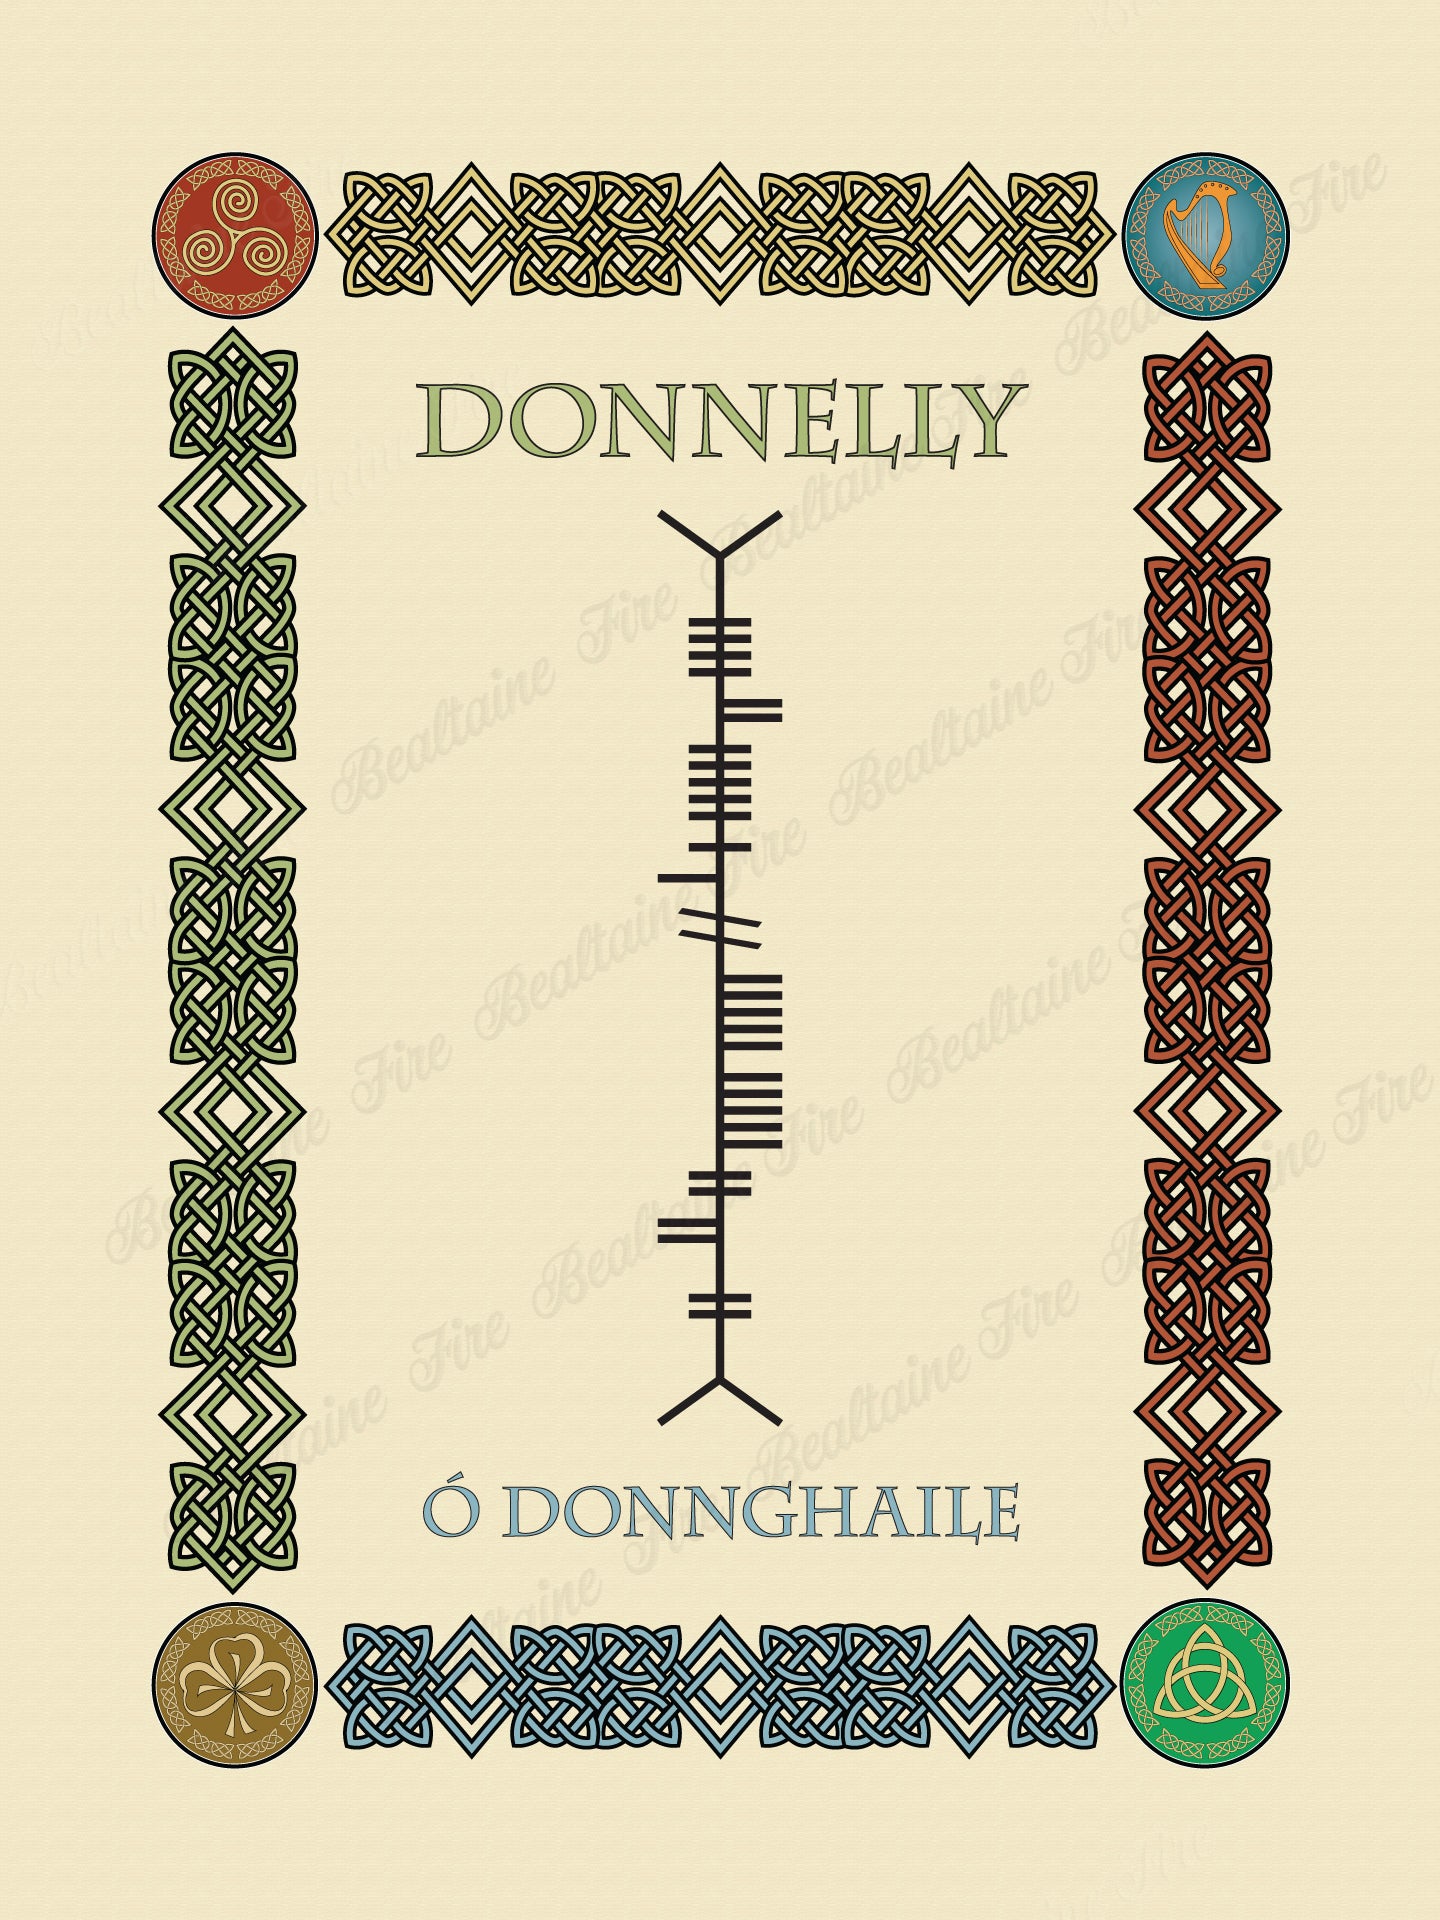 Donnelly in Old Irish and Ogham - PDF Download